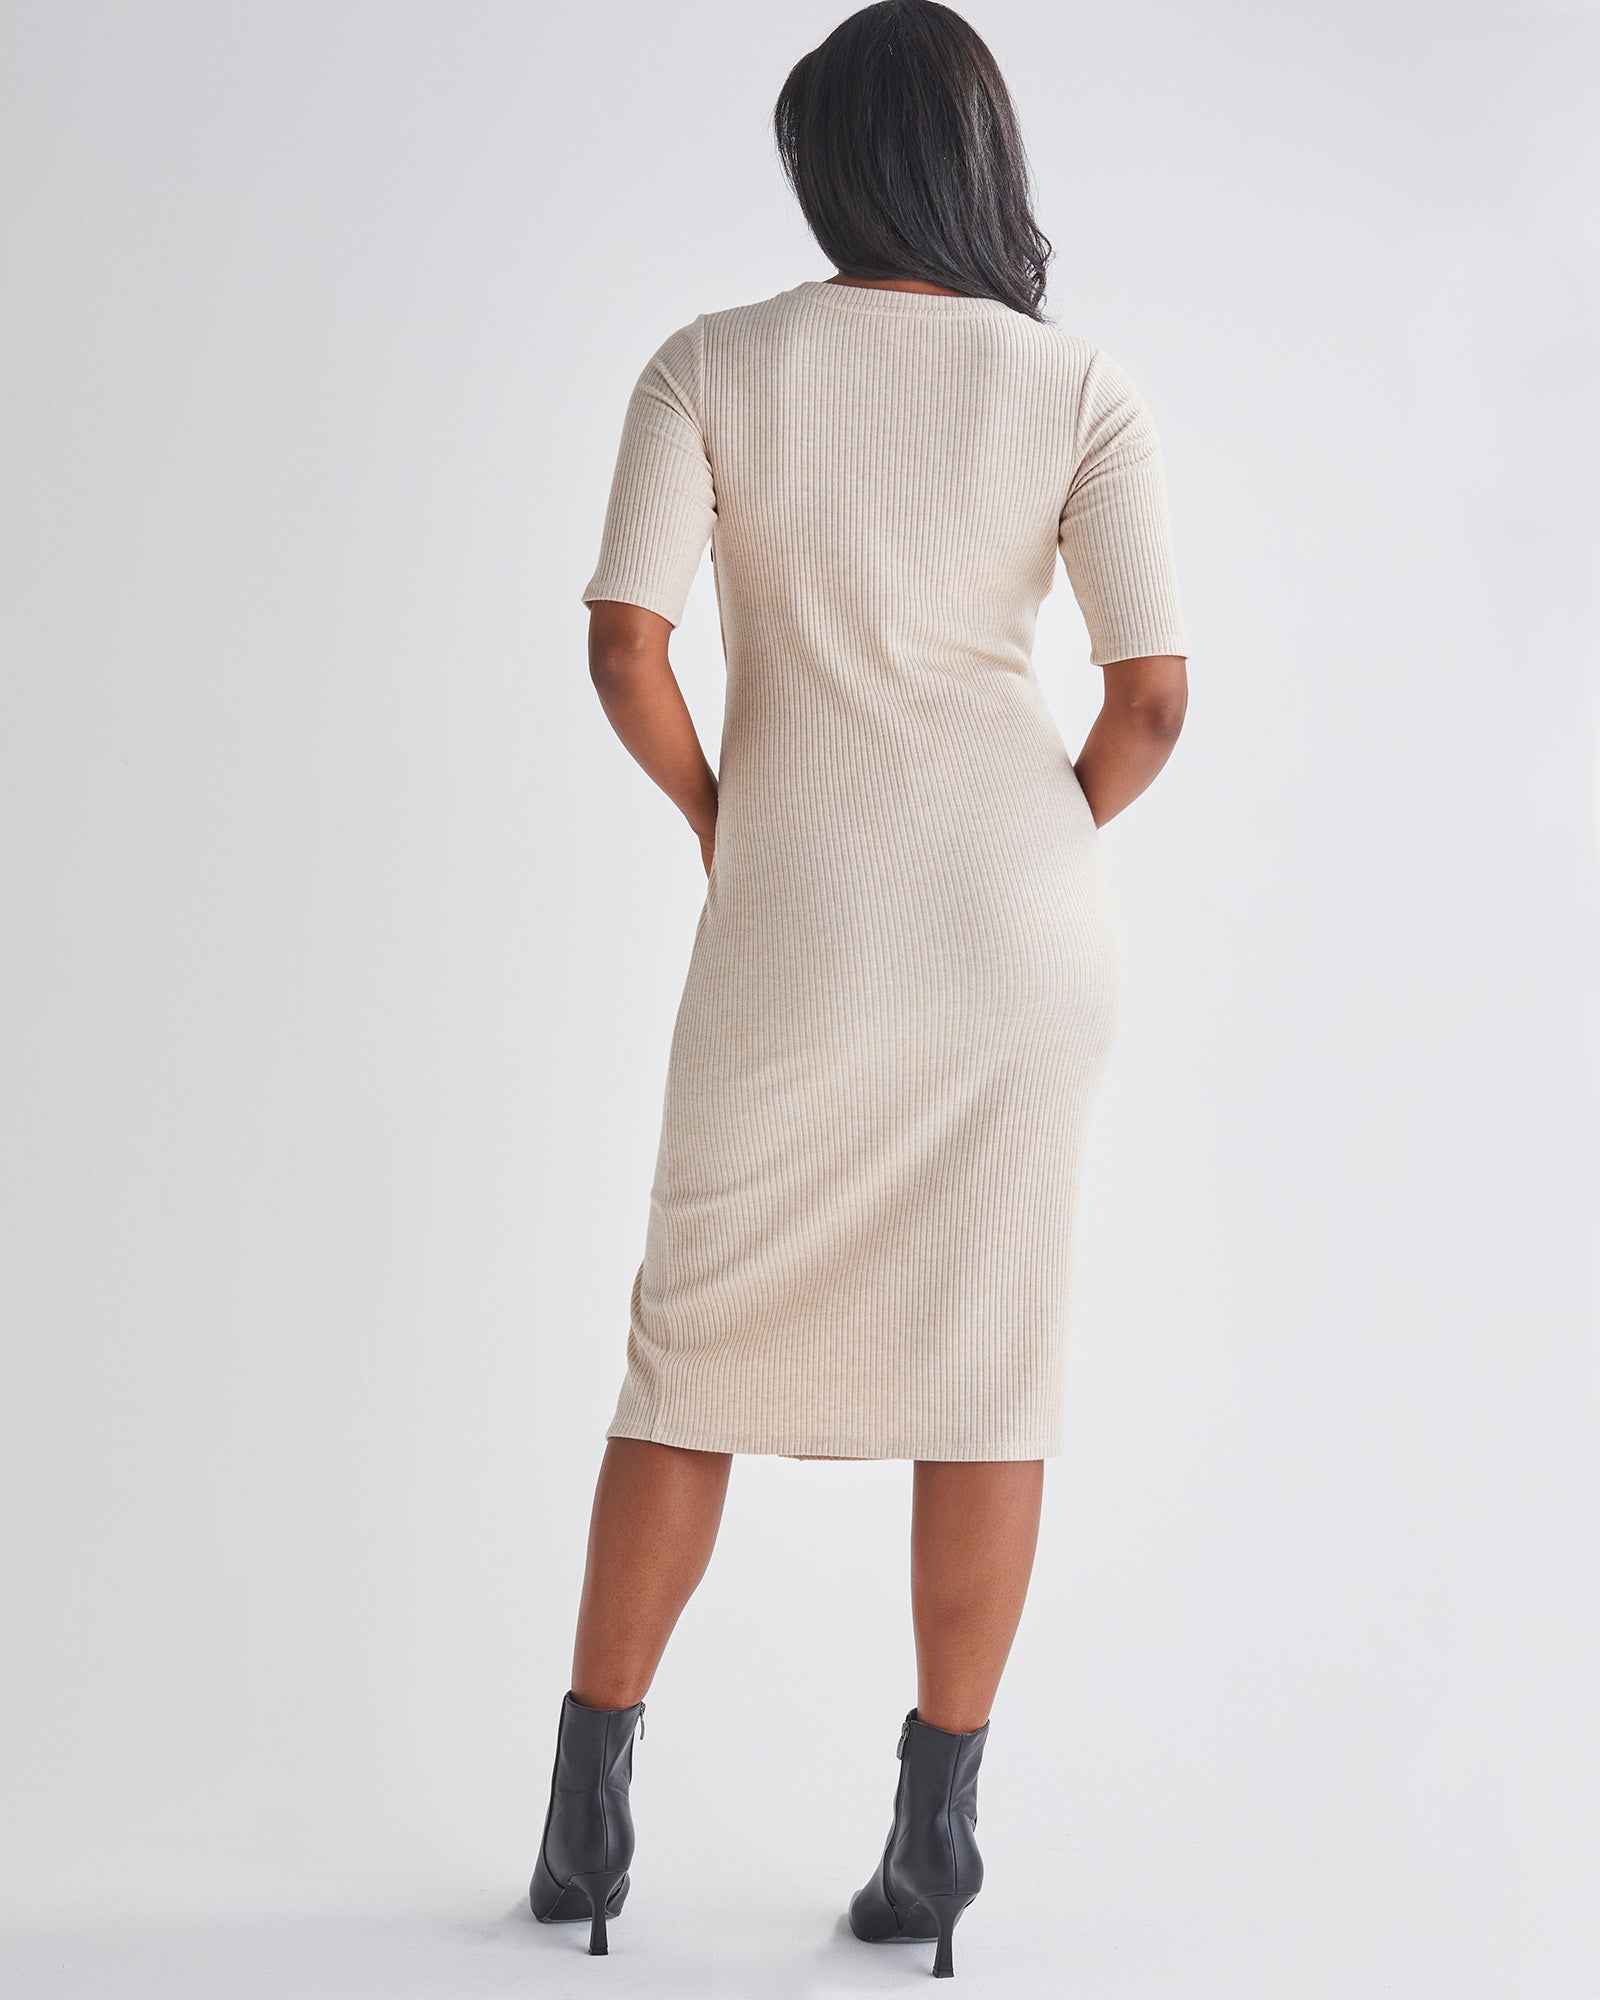 Back View - A Pregnant Woman Maternity Elegance Bodycon Dress in Cream with Lift Side Buttons from Angel maternity